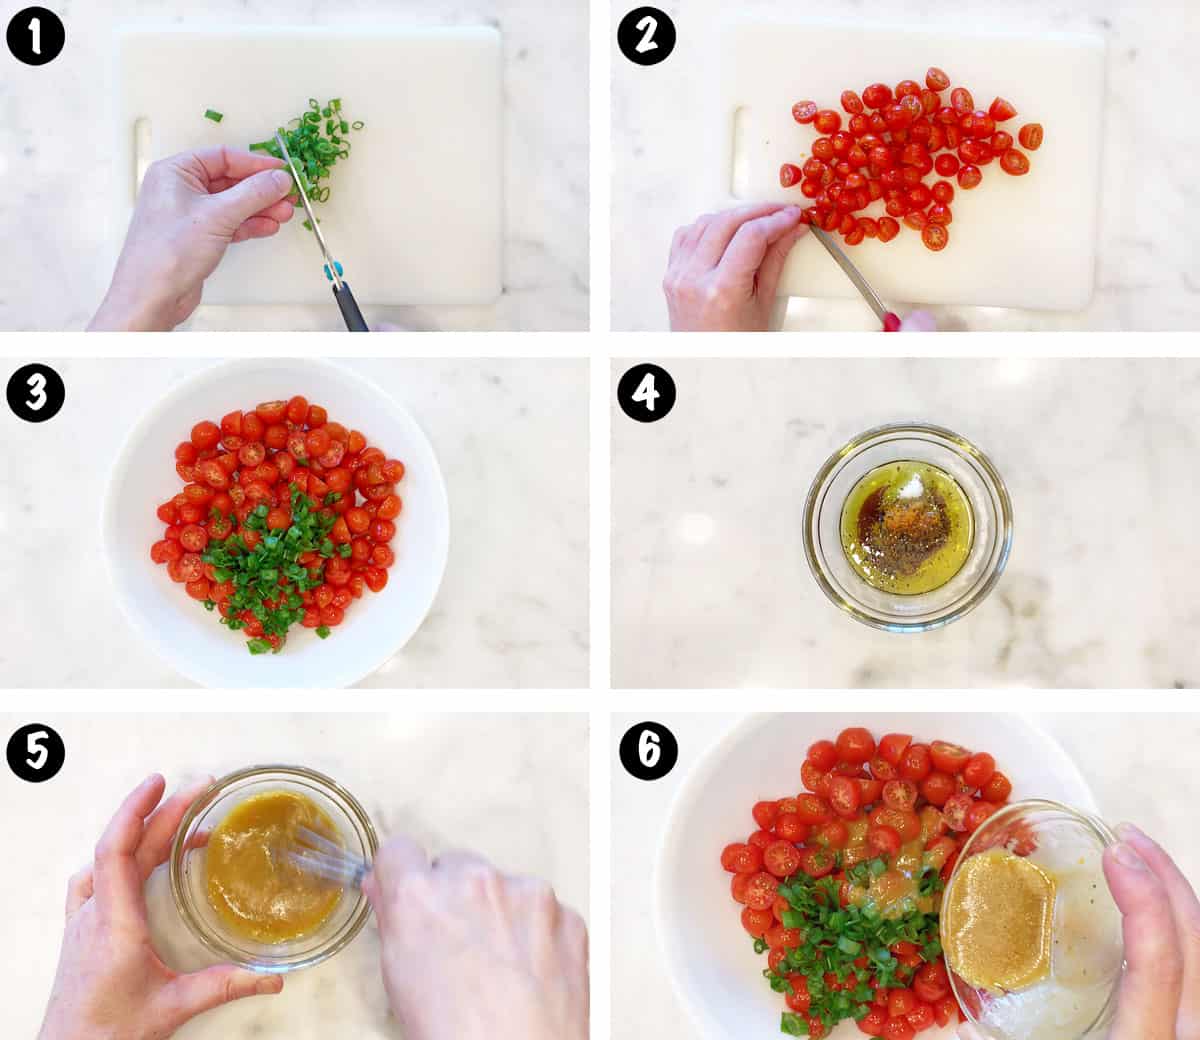 A photo collage showing the steps for making a tomato salad. 